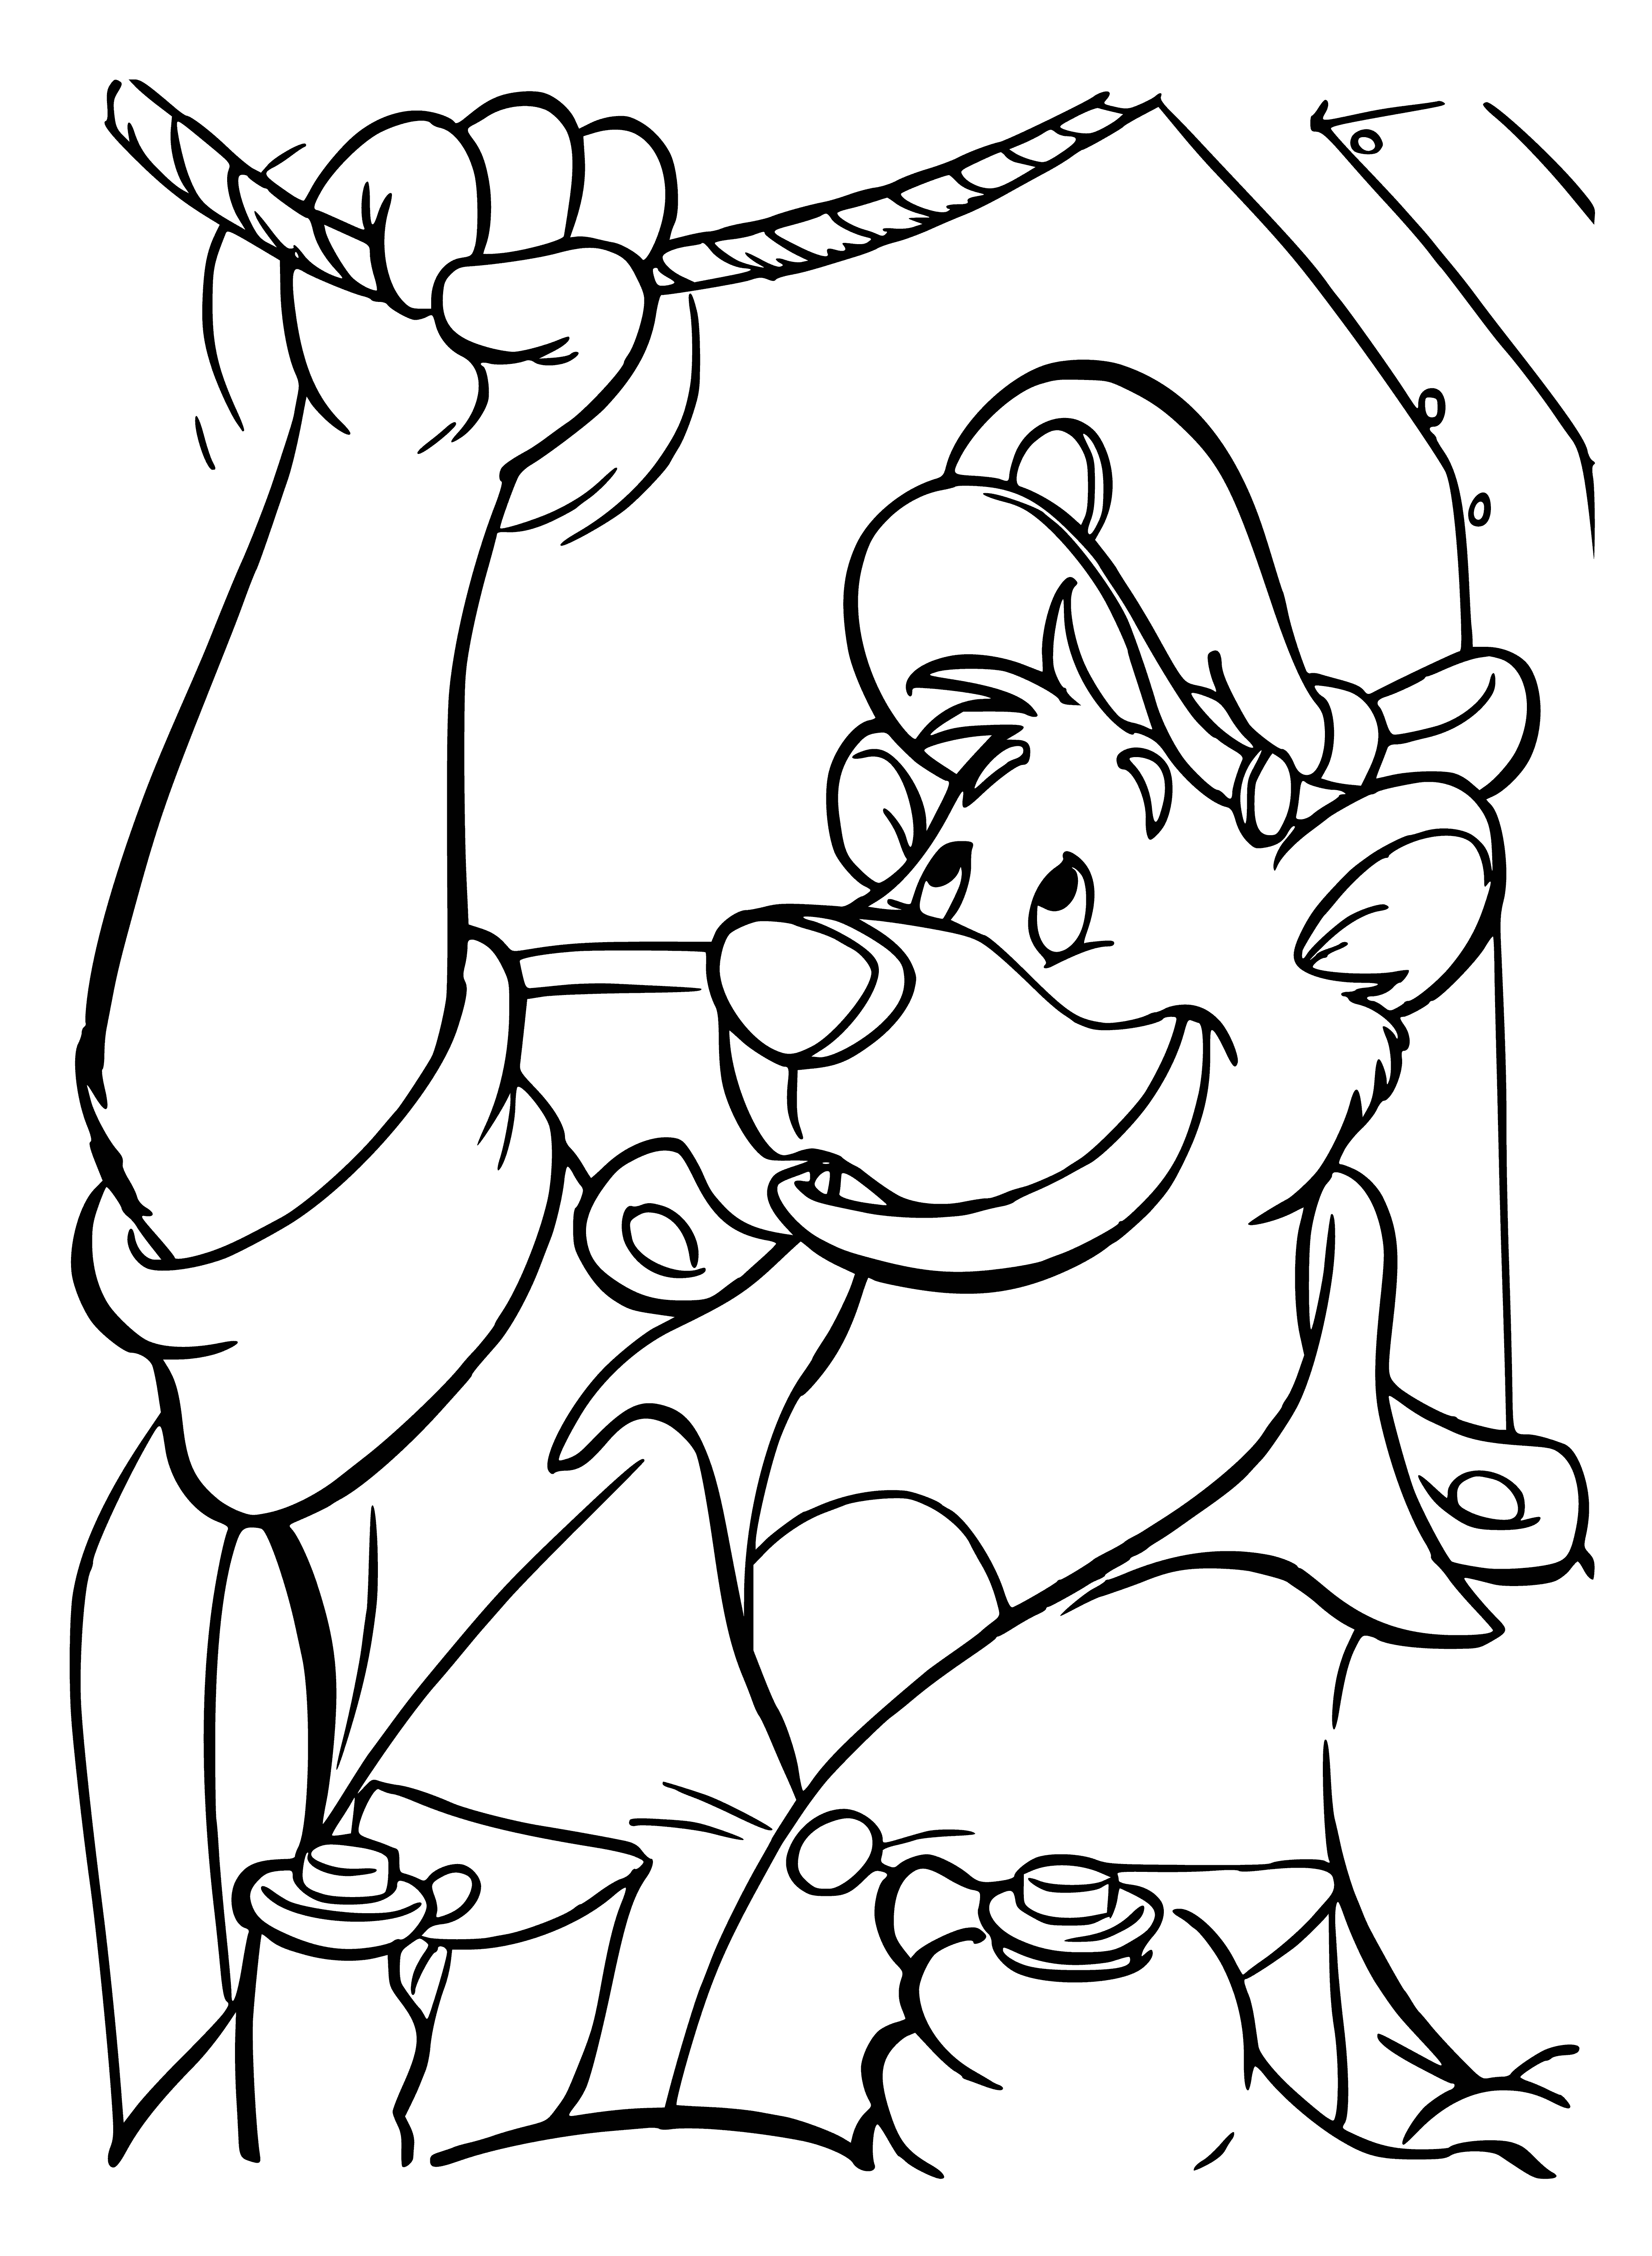 In one motion ... coloring page